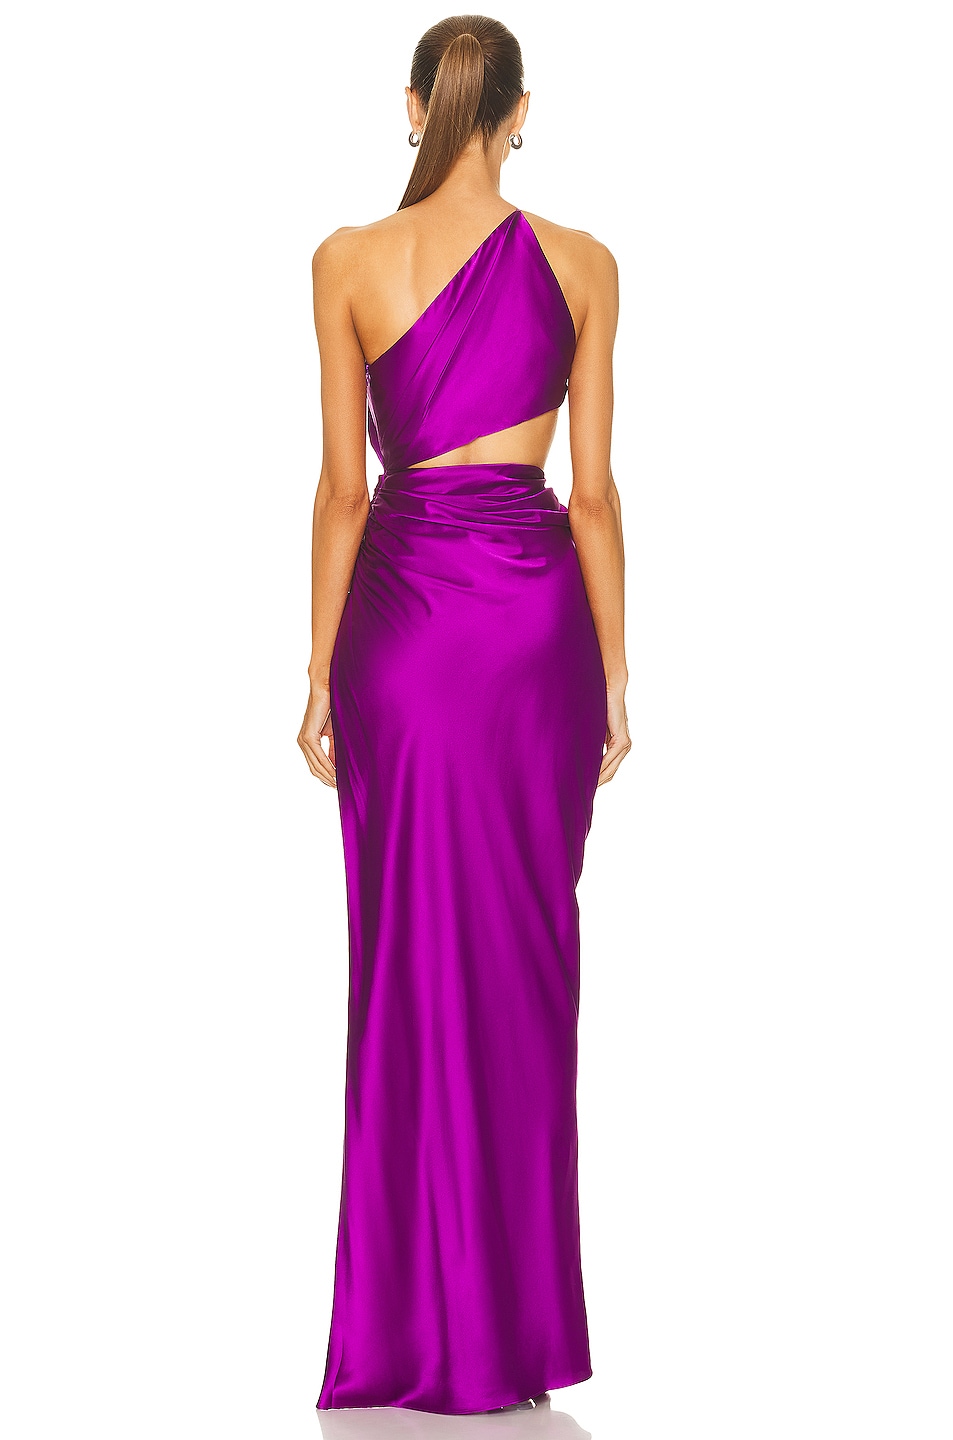 The Sei for FWRD One Shoulder Cut Out Gown in Acai | FWRD